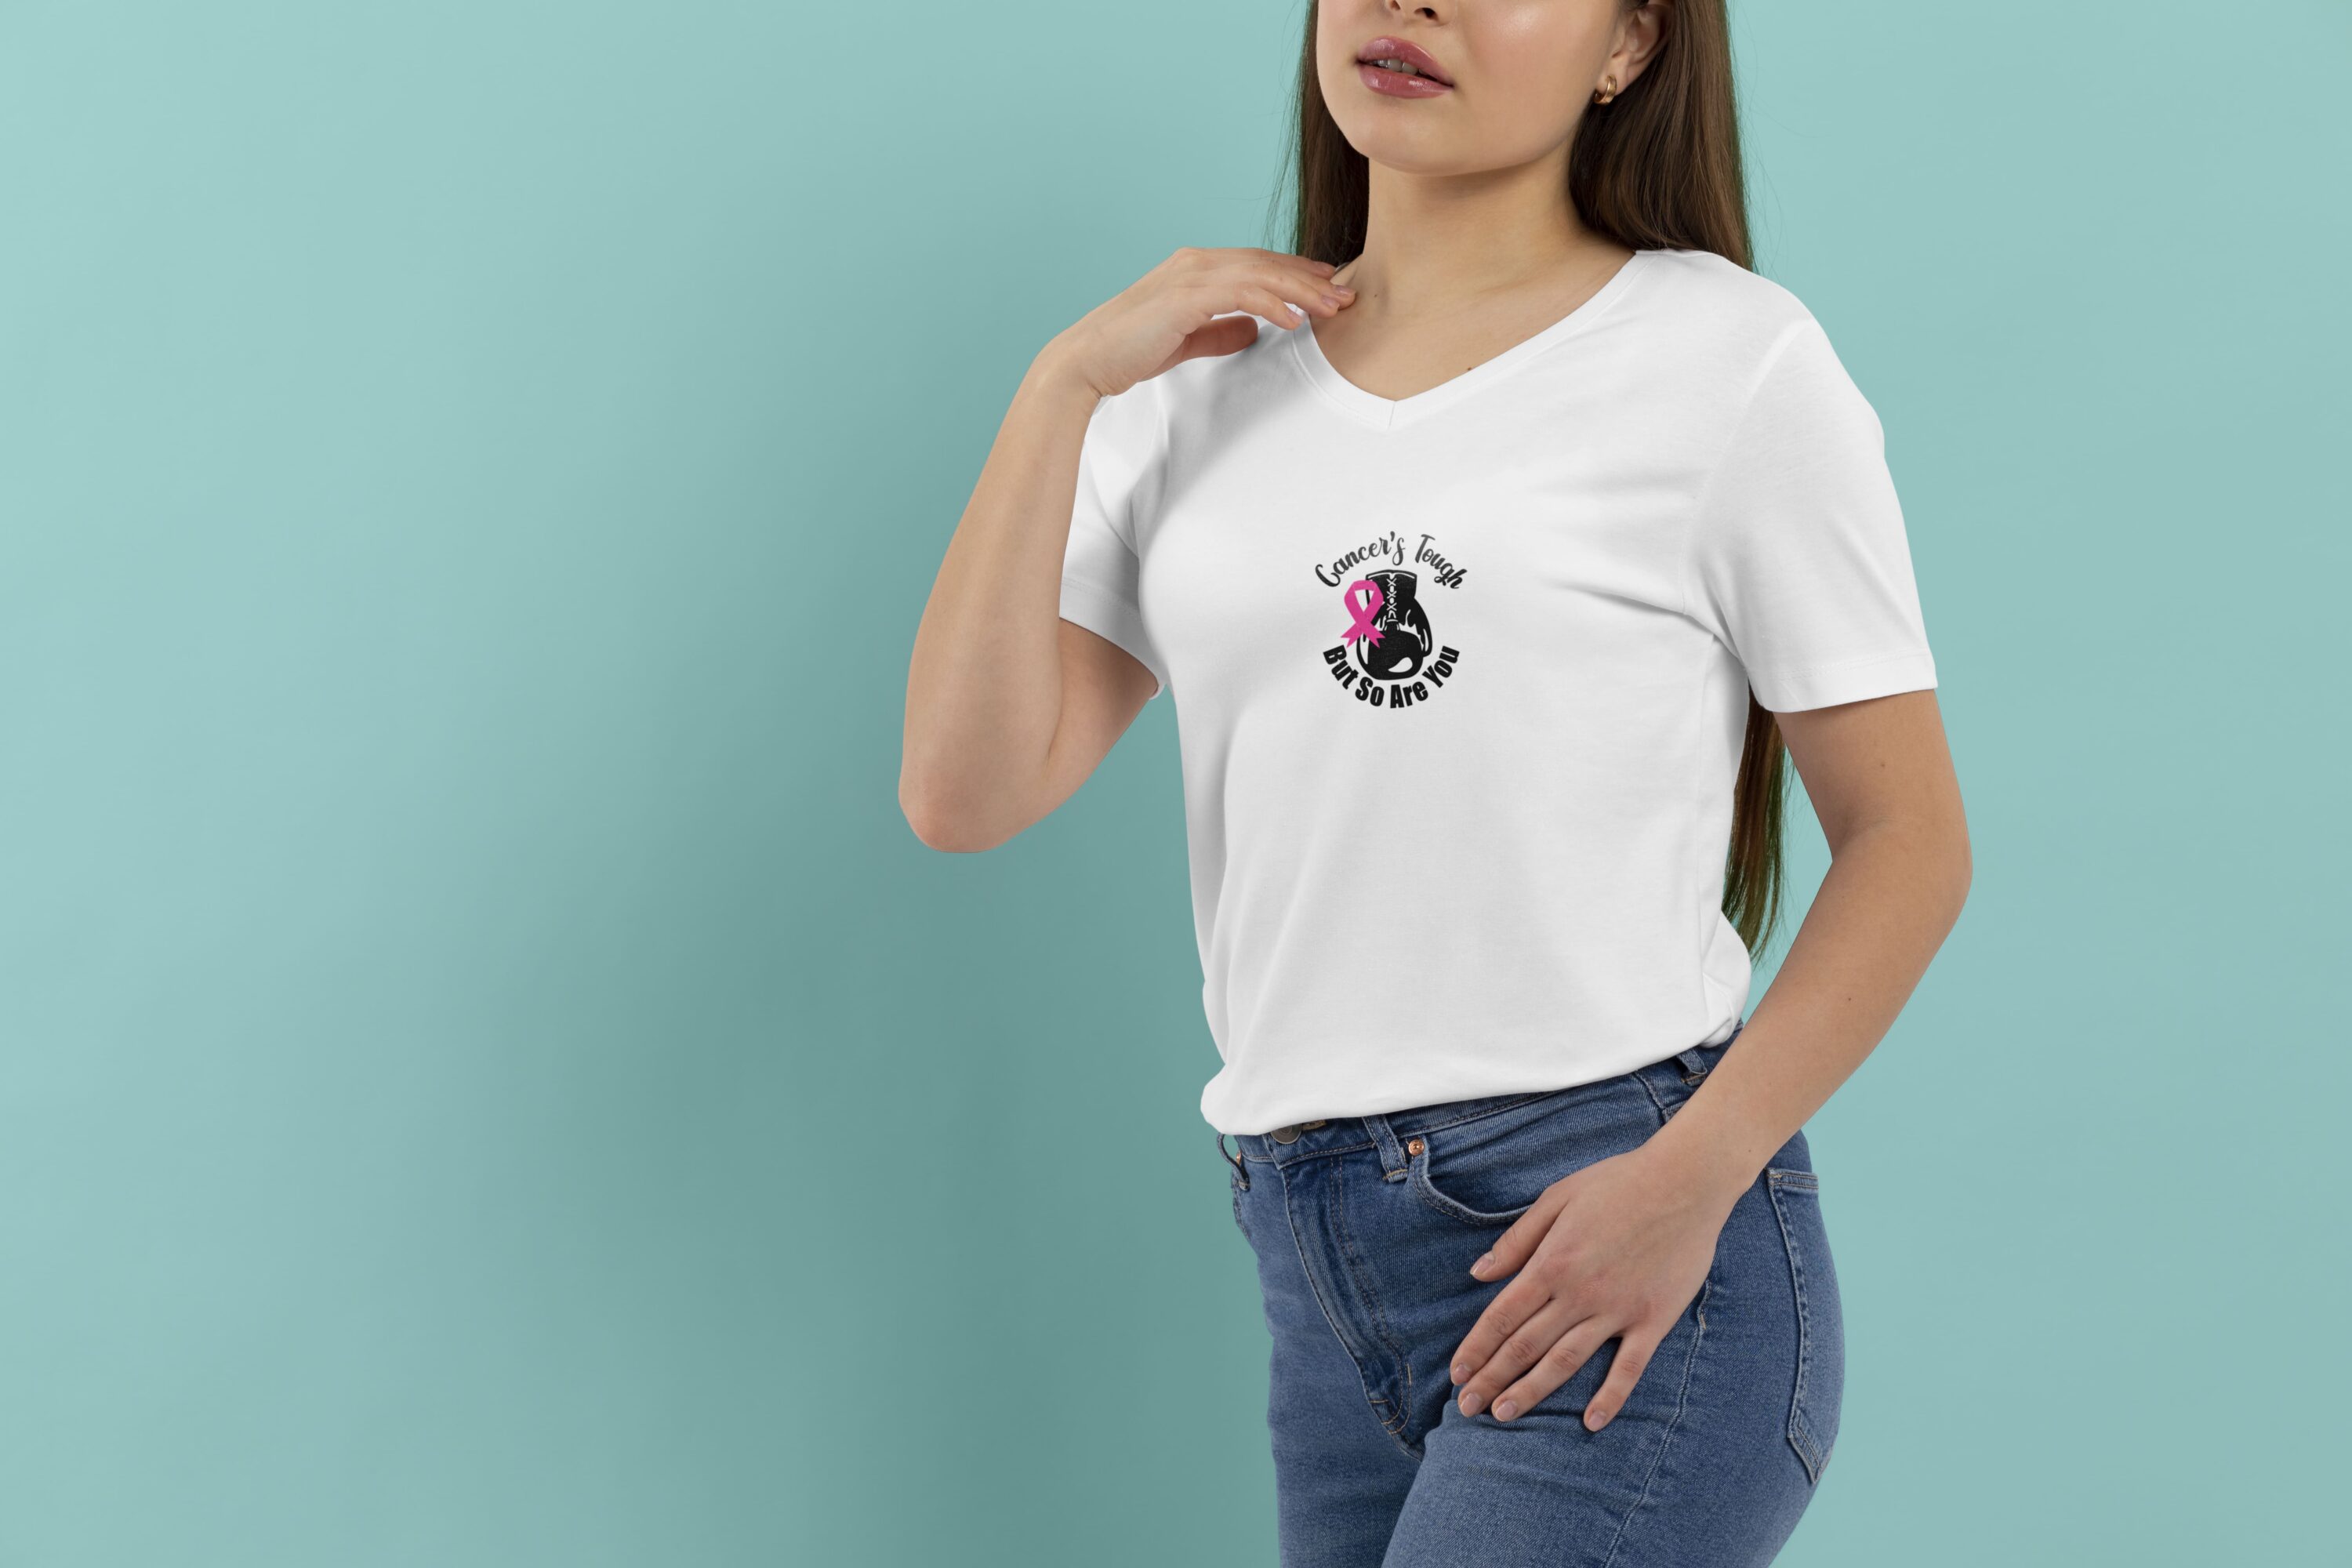 Bicolor breast cancer illustration on a white t-shirt.